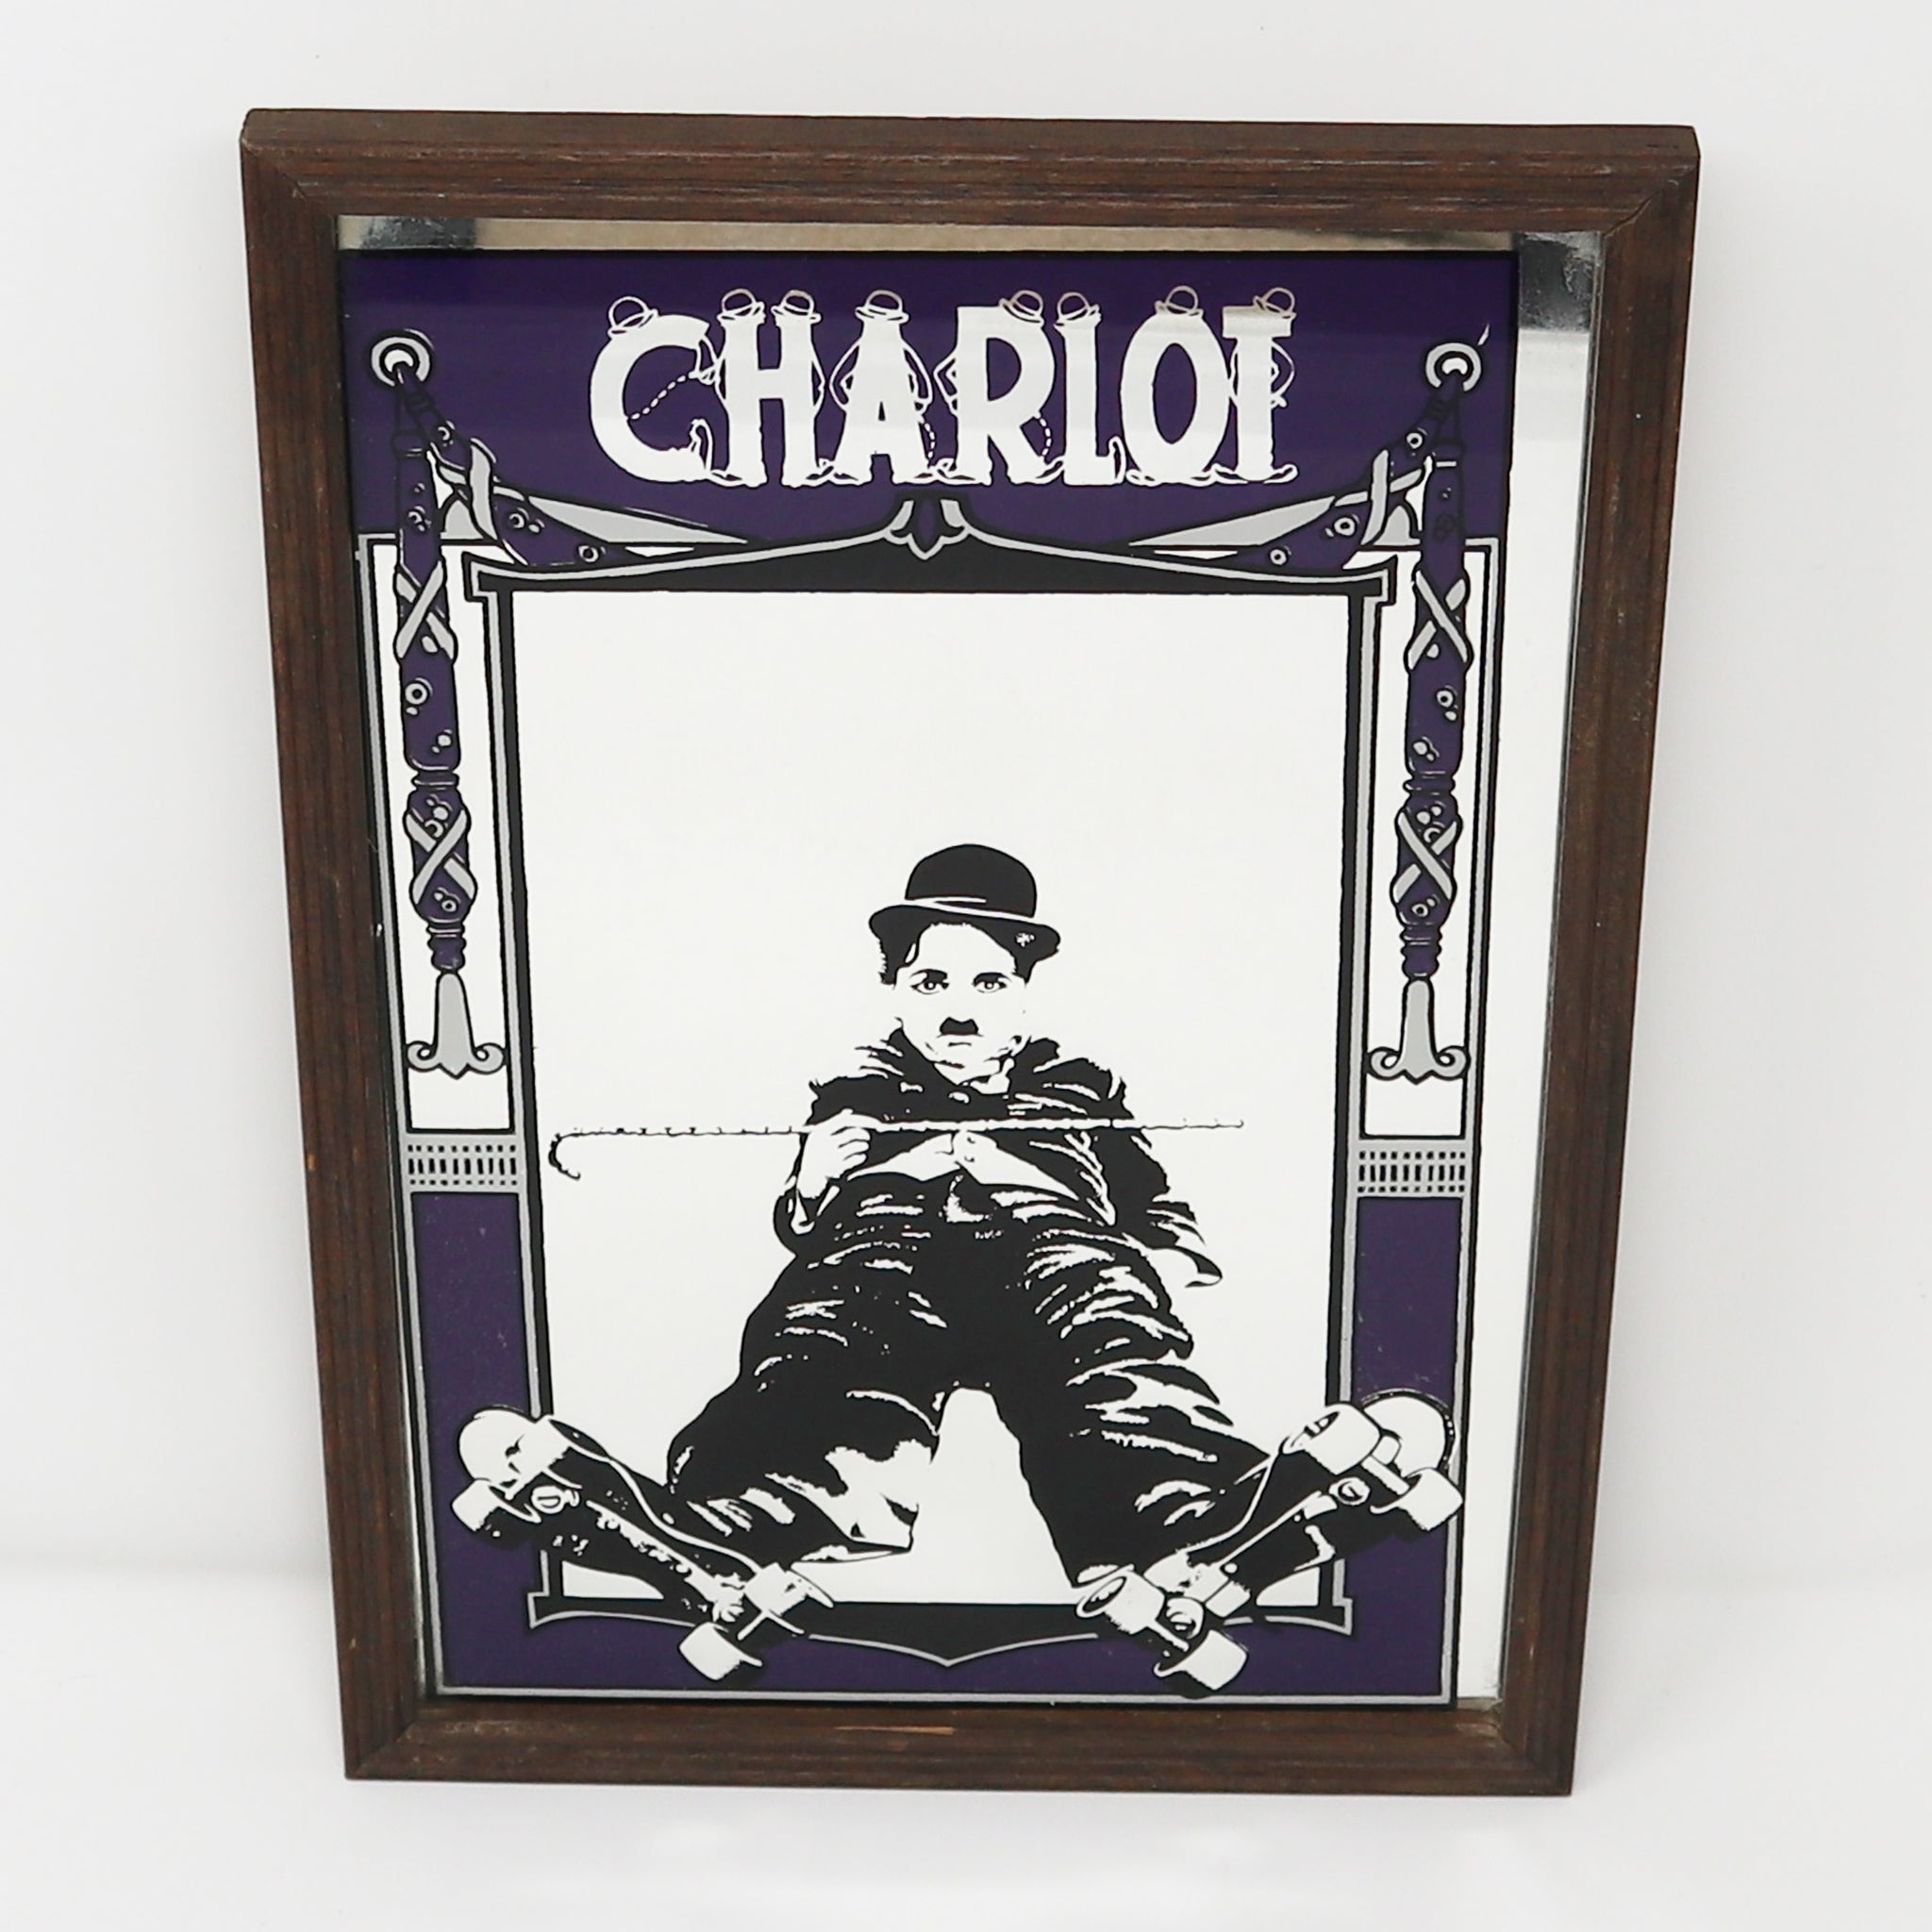 Vintage 1970s Charlie Charles Chaplin Charlot The Little Tramp Wooden Framed French Mirror Rare Bar Pub Brewery Beer Advertising Style Man Cave